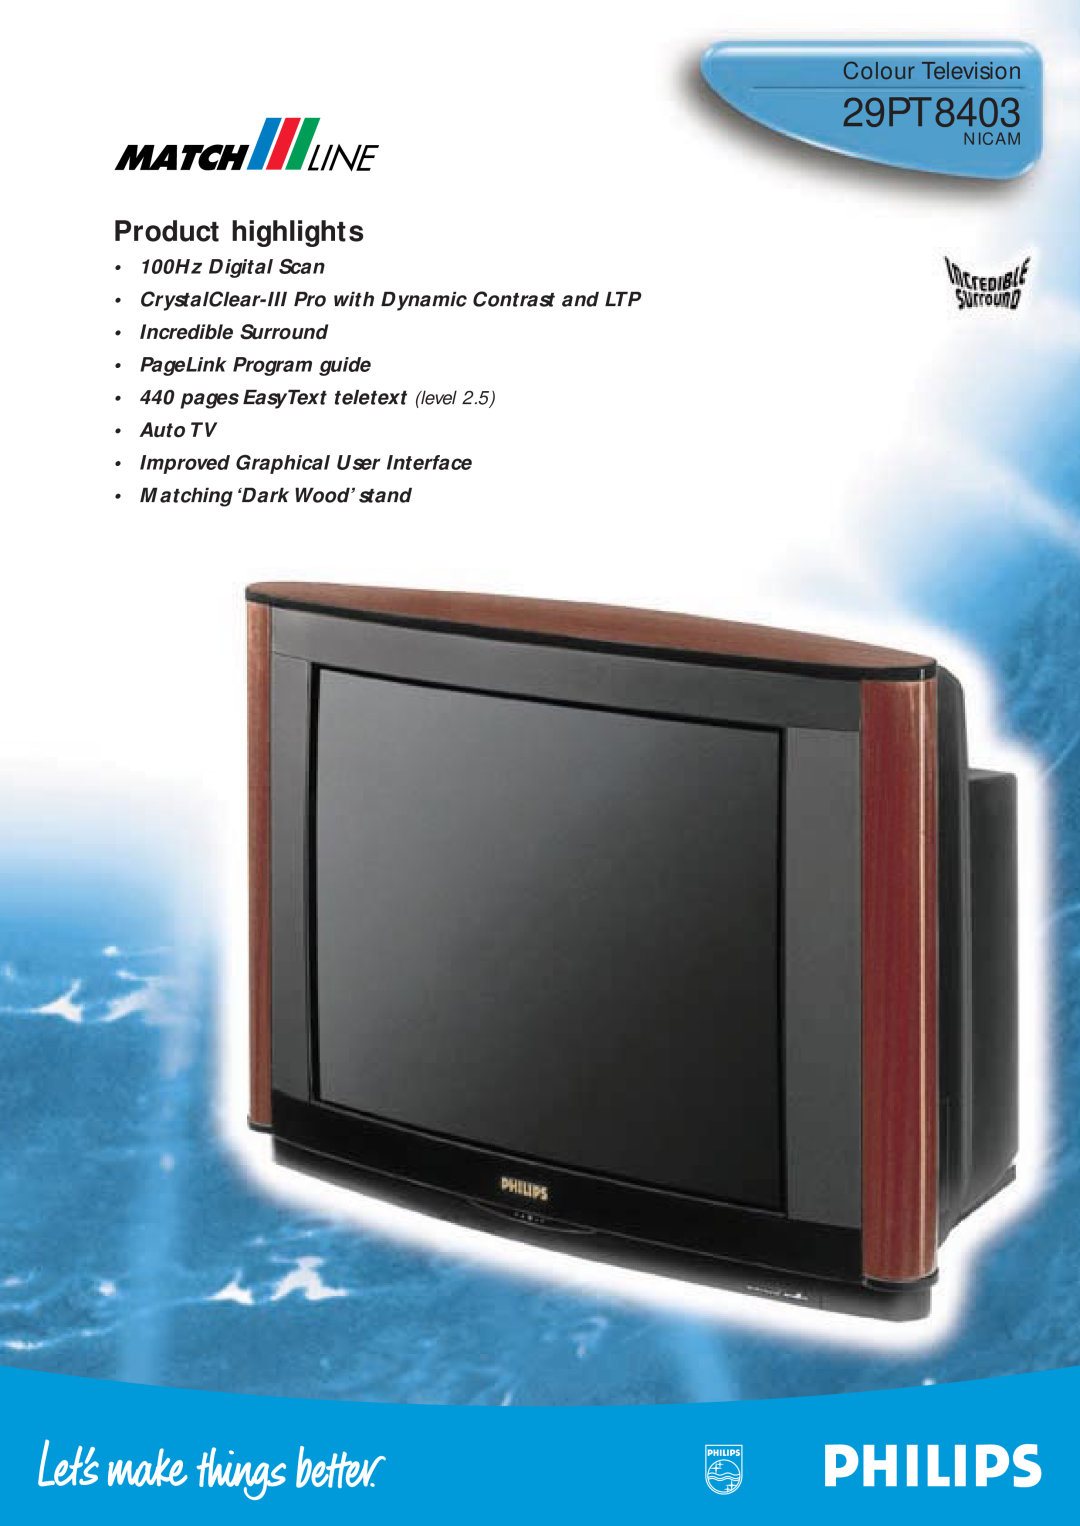 Philips 29PT8403NICAM manual Colour Television, Nicam, Product highlights, Incredible Surround PageLink Program guide 